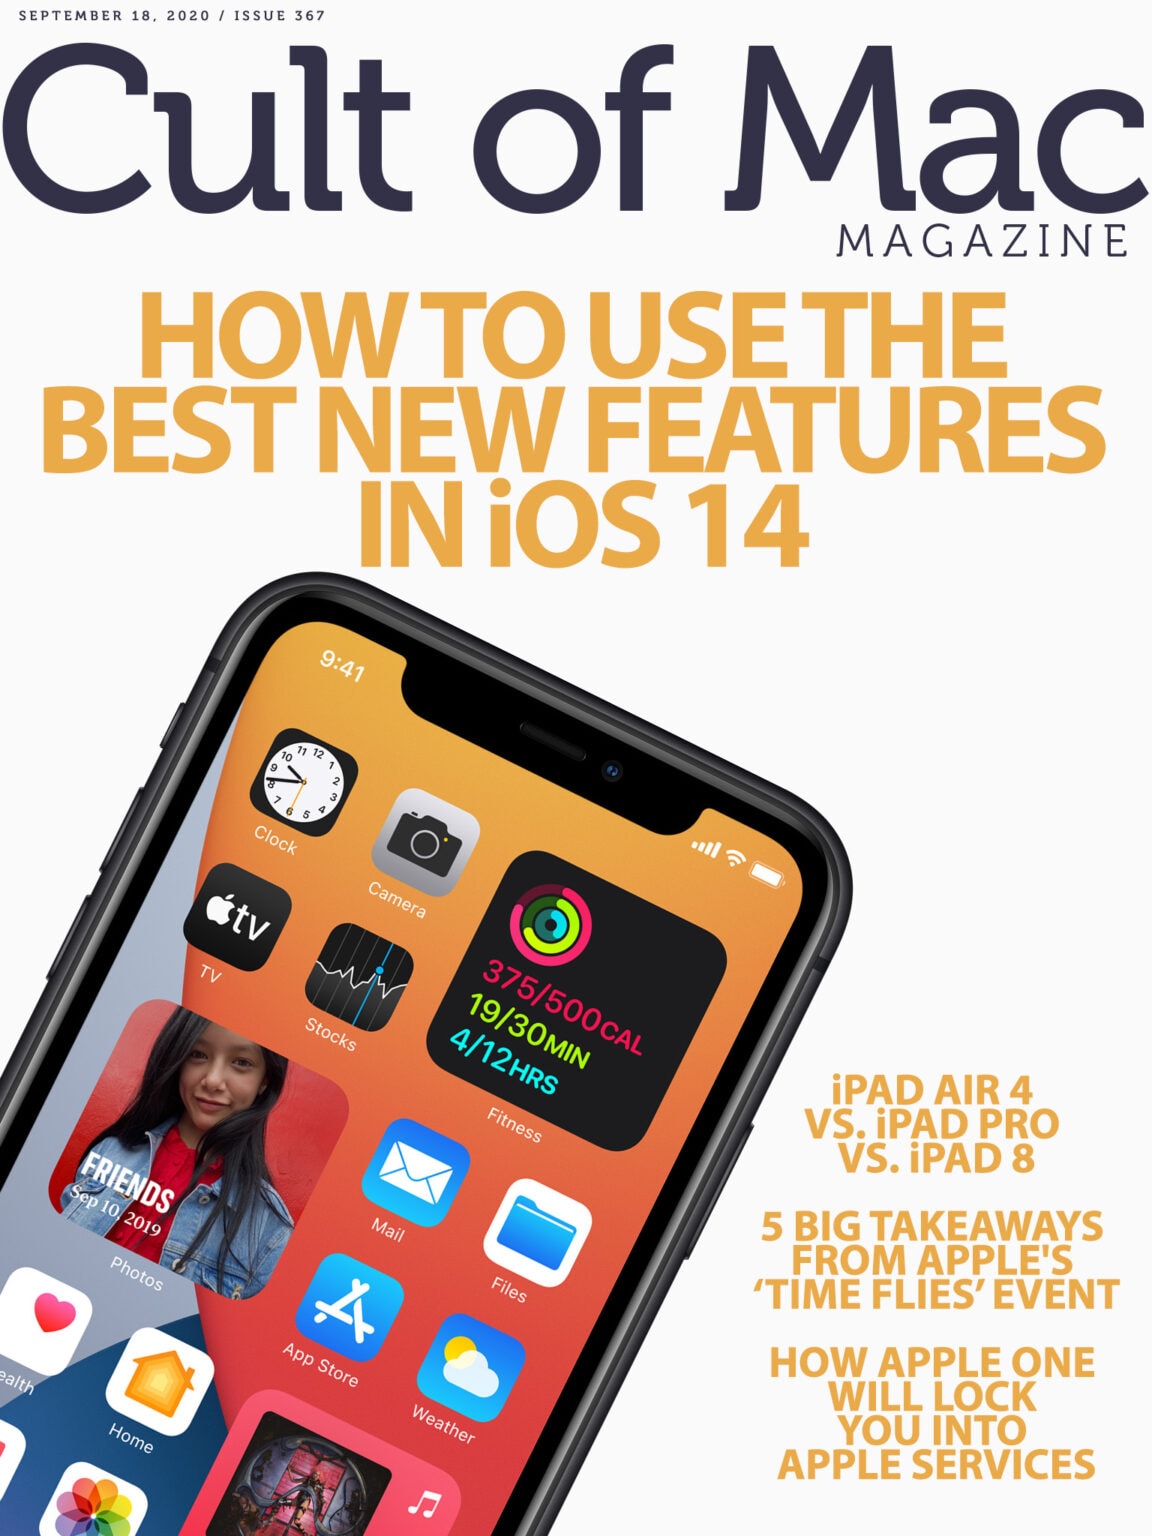 Now that you've upgraded, it's time to take advantage of all the new iOS 14 features.